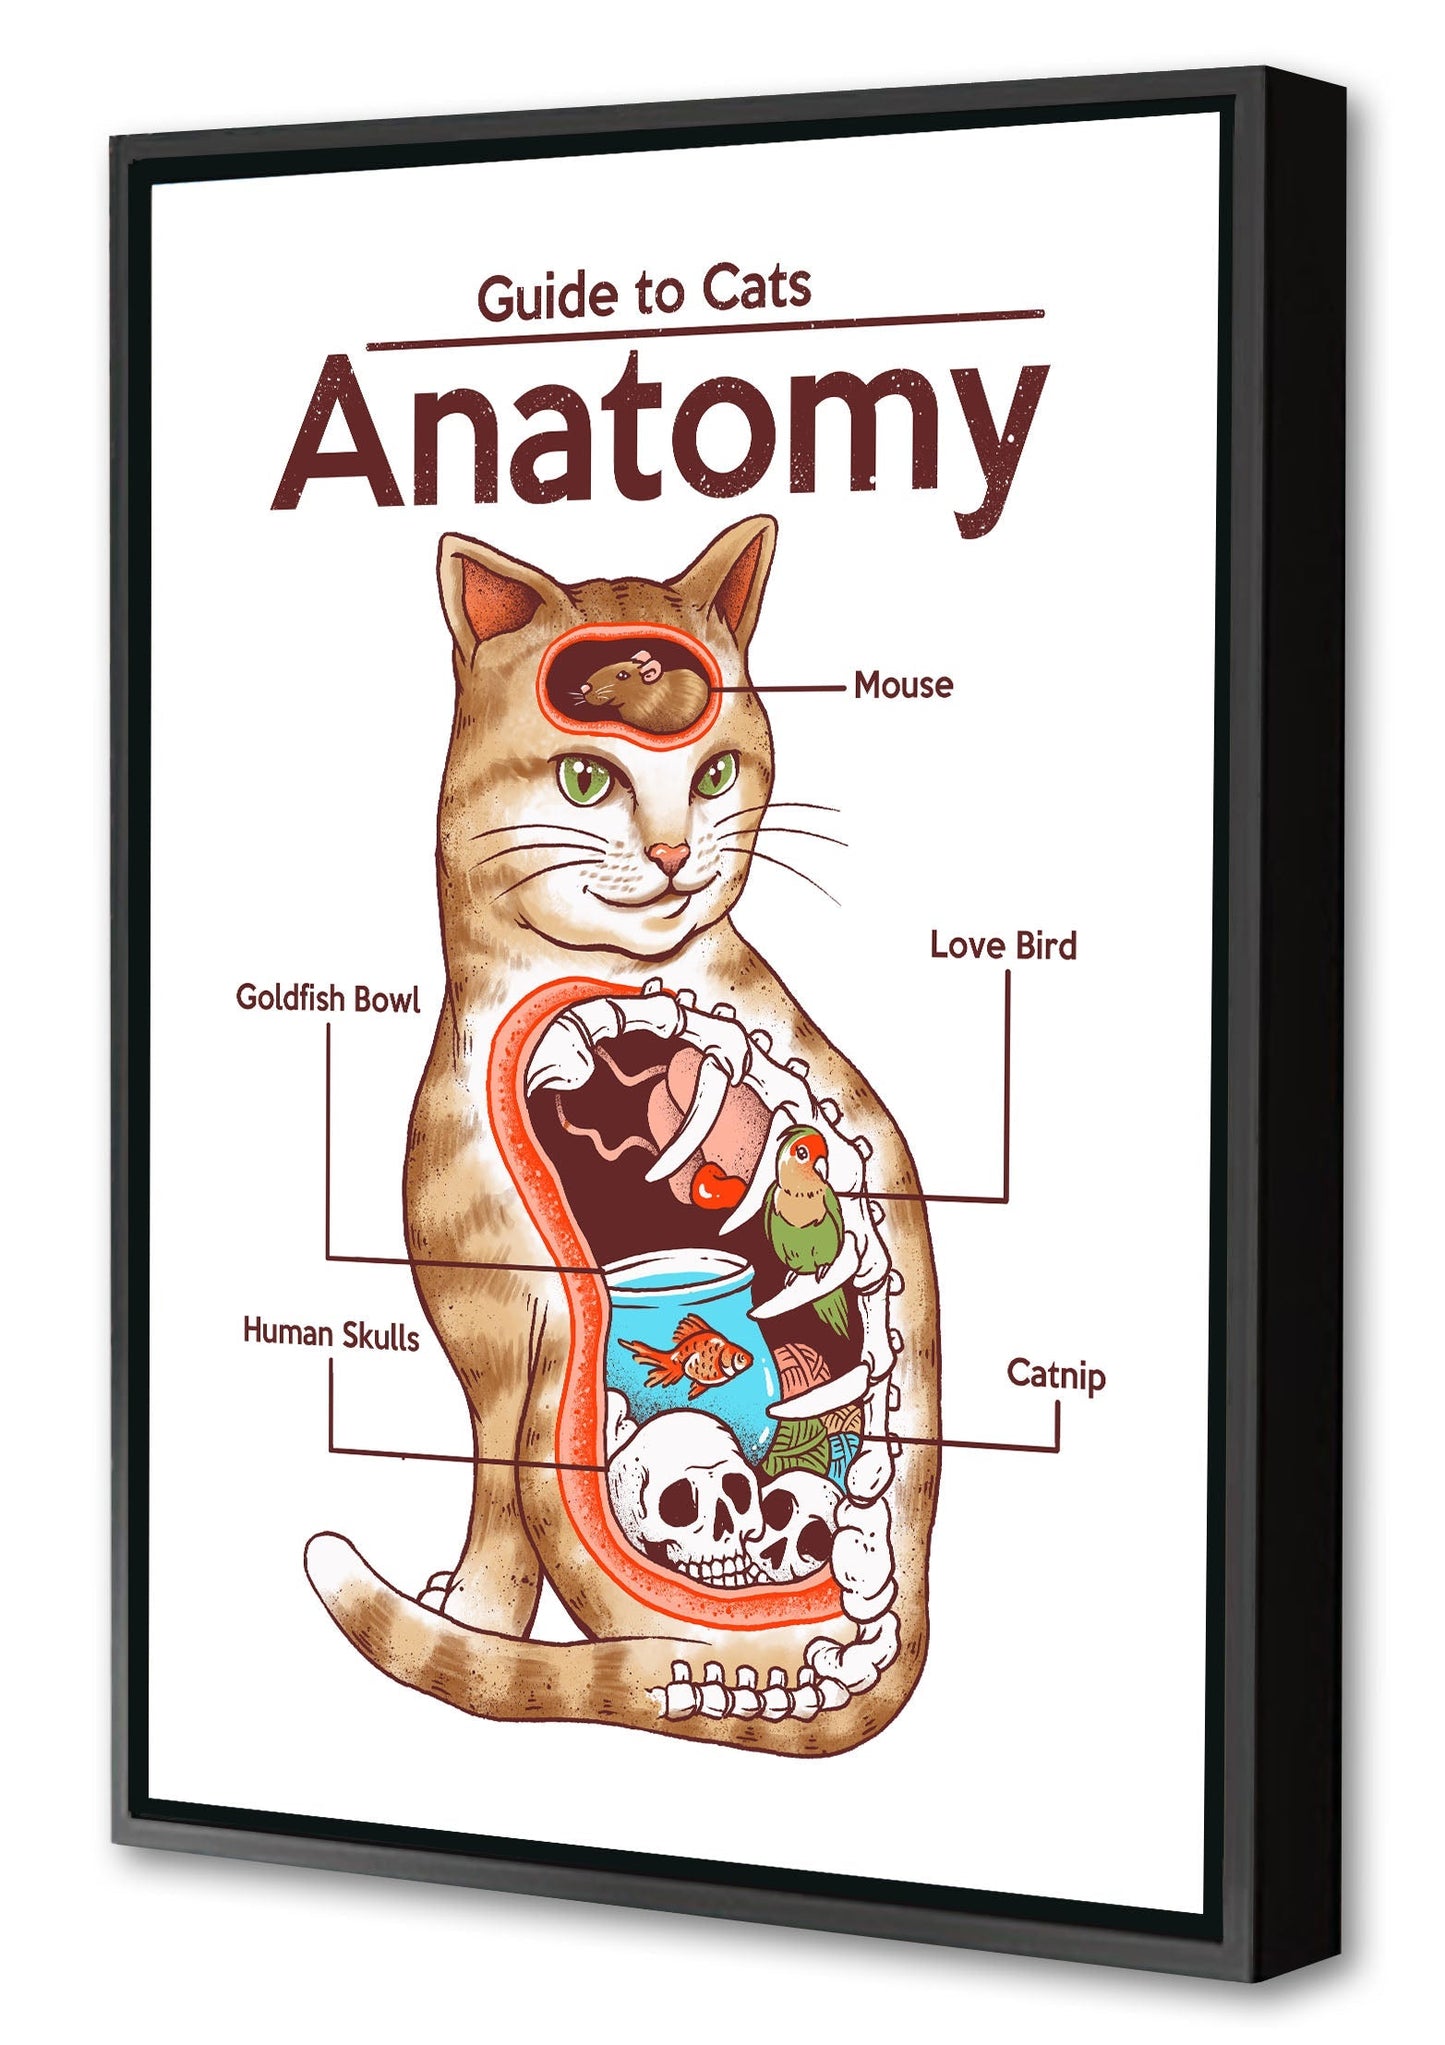 Anatomy of a Cat-print, vincent-trinidad-Canvas Print with Box Frame-40 x 60 cm-BLUE SHAKER